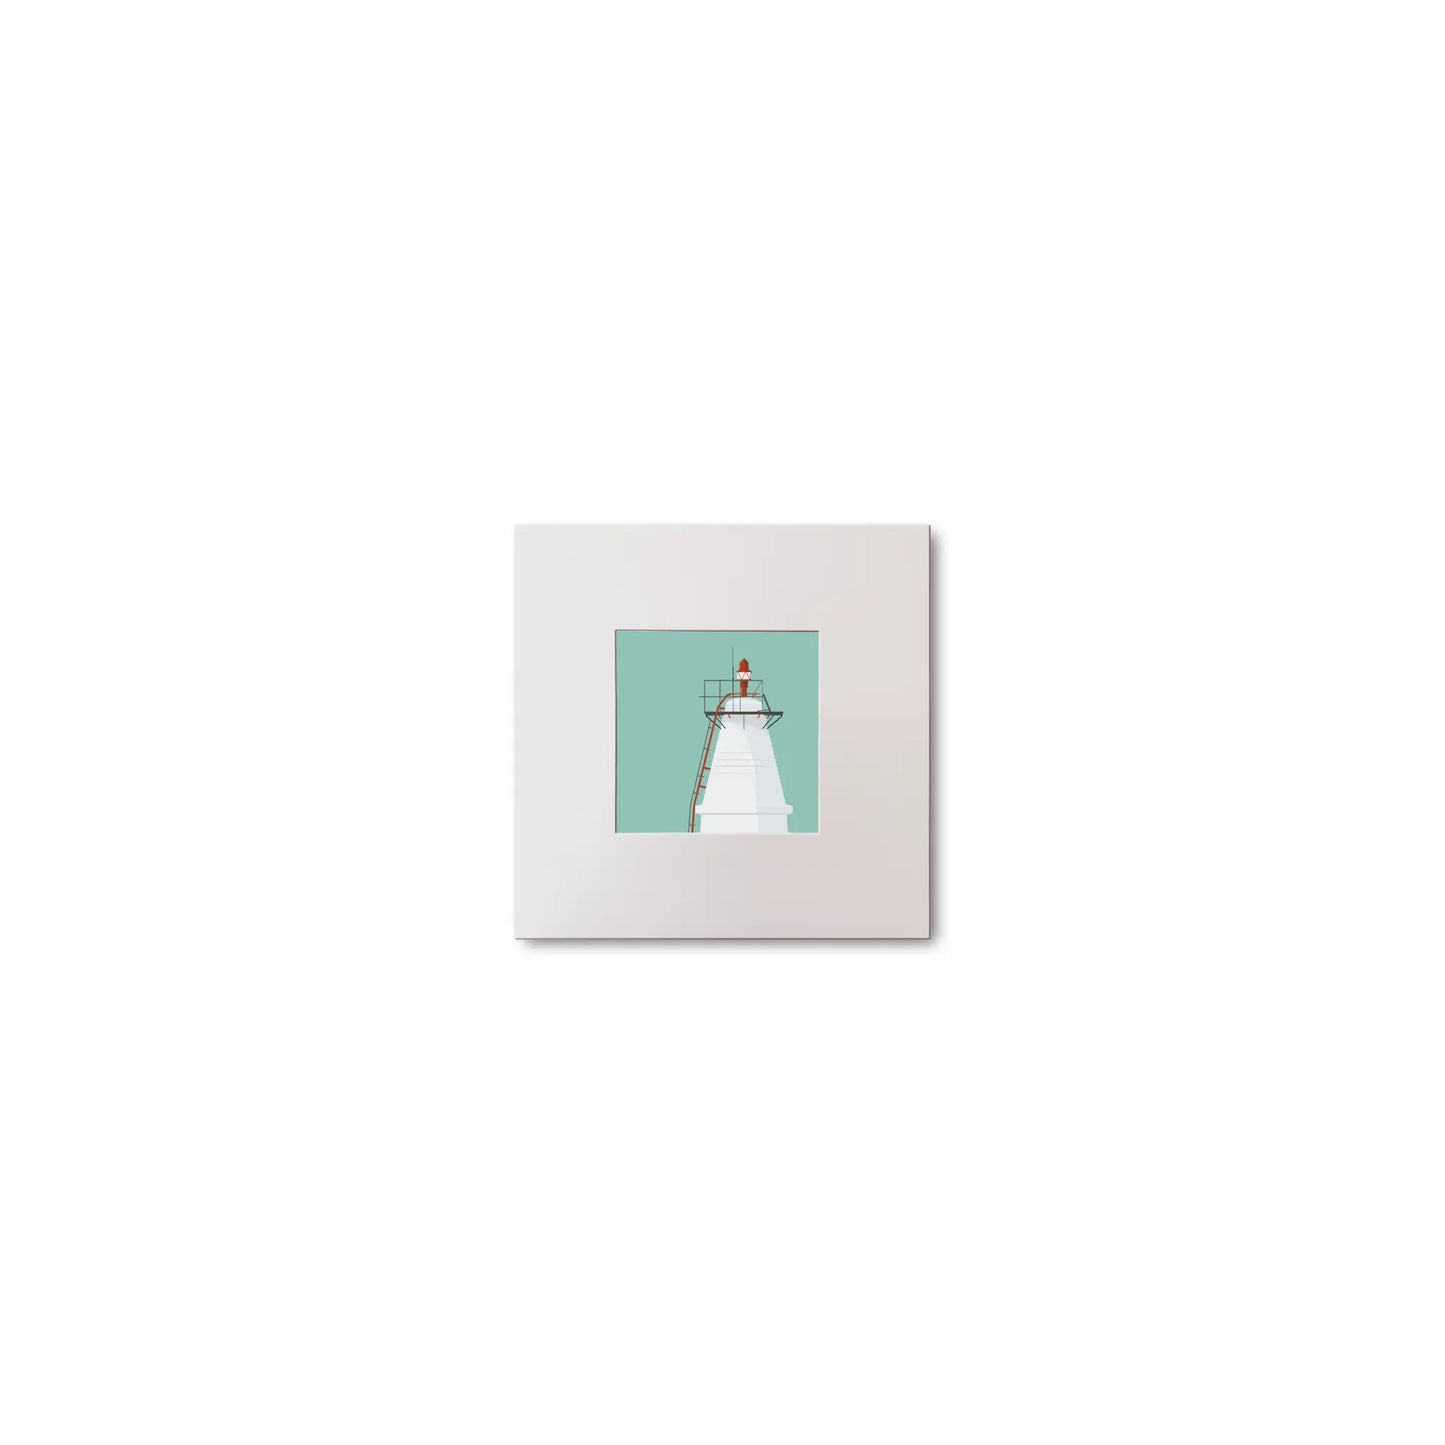 Illustration Copper Point lighthouse on an ocean green background, mounted and measuring 10x10cm.